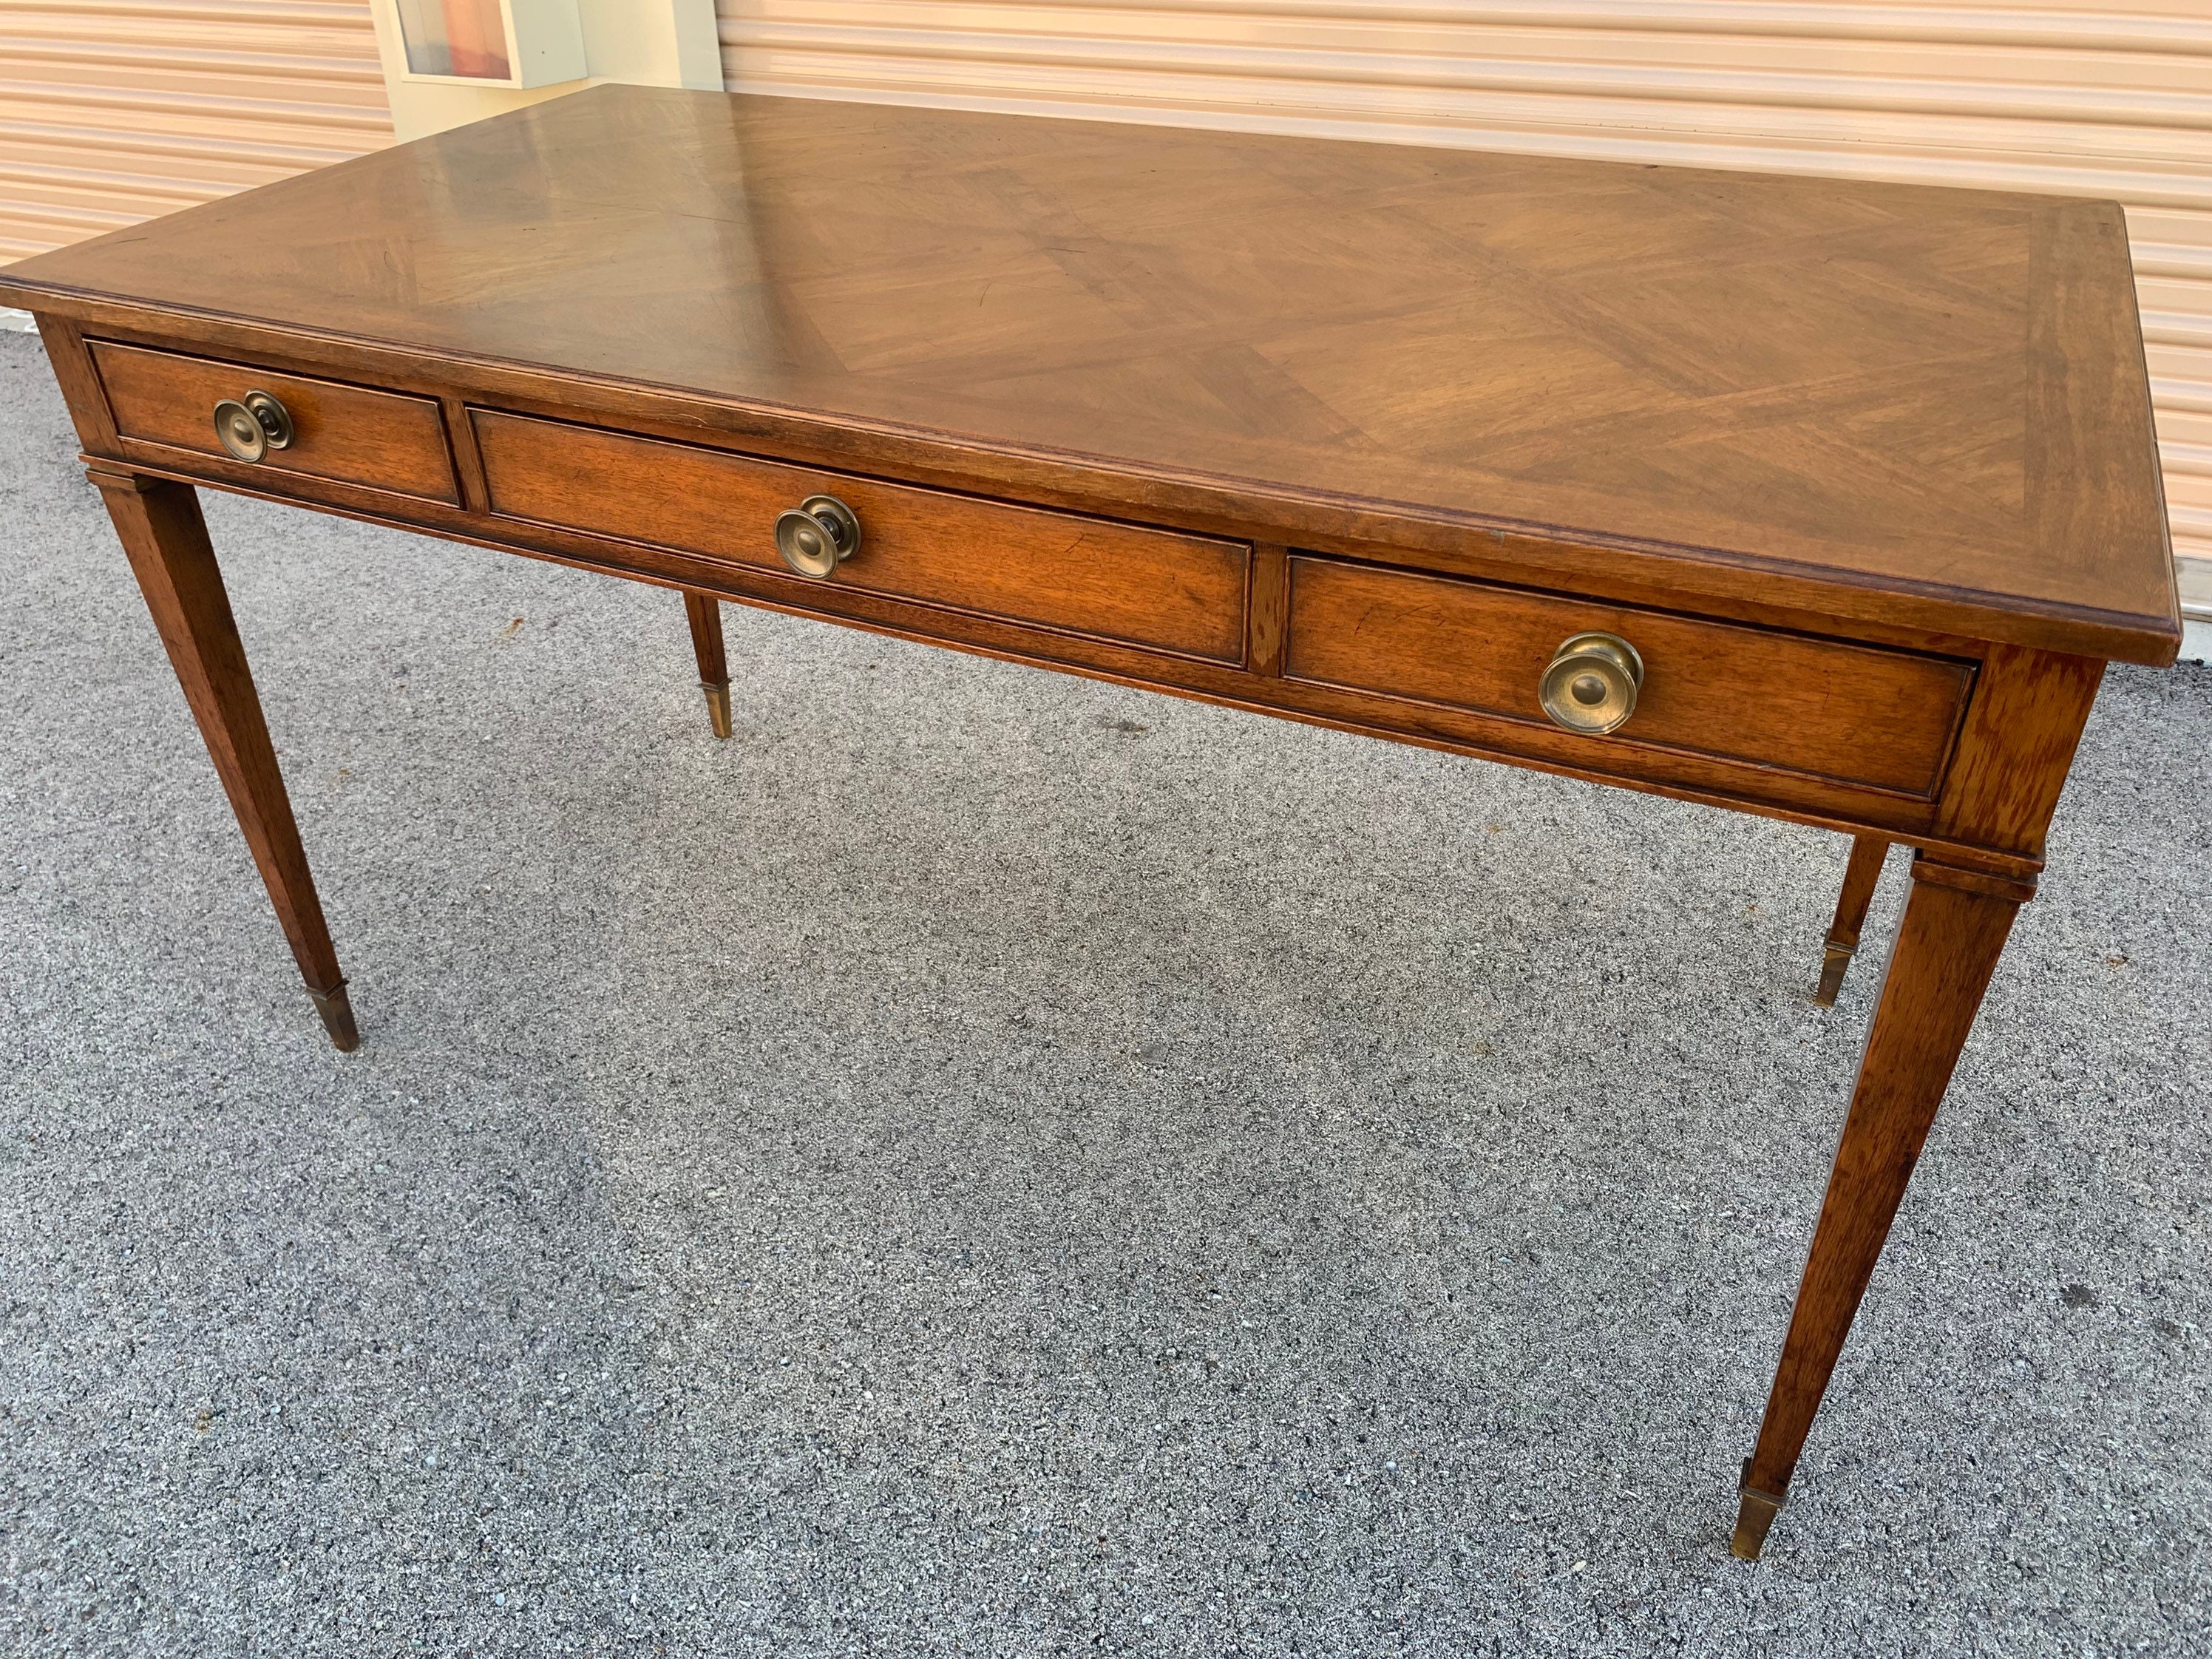 Antique 1940 Regency Style Writing Desk Table Mahogany 28d54w24h29